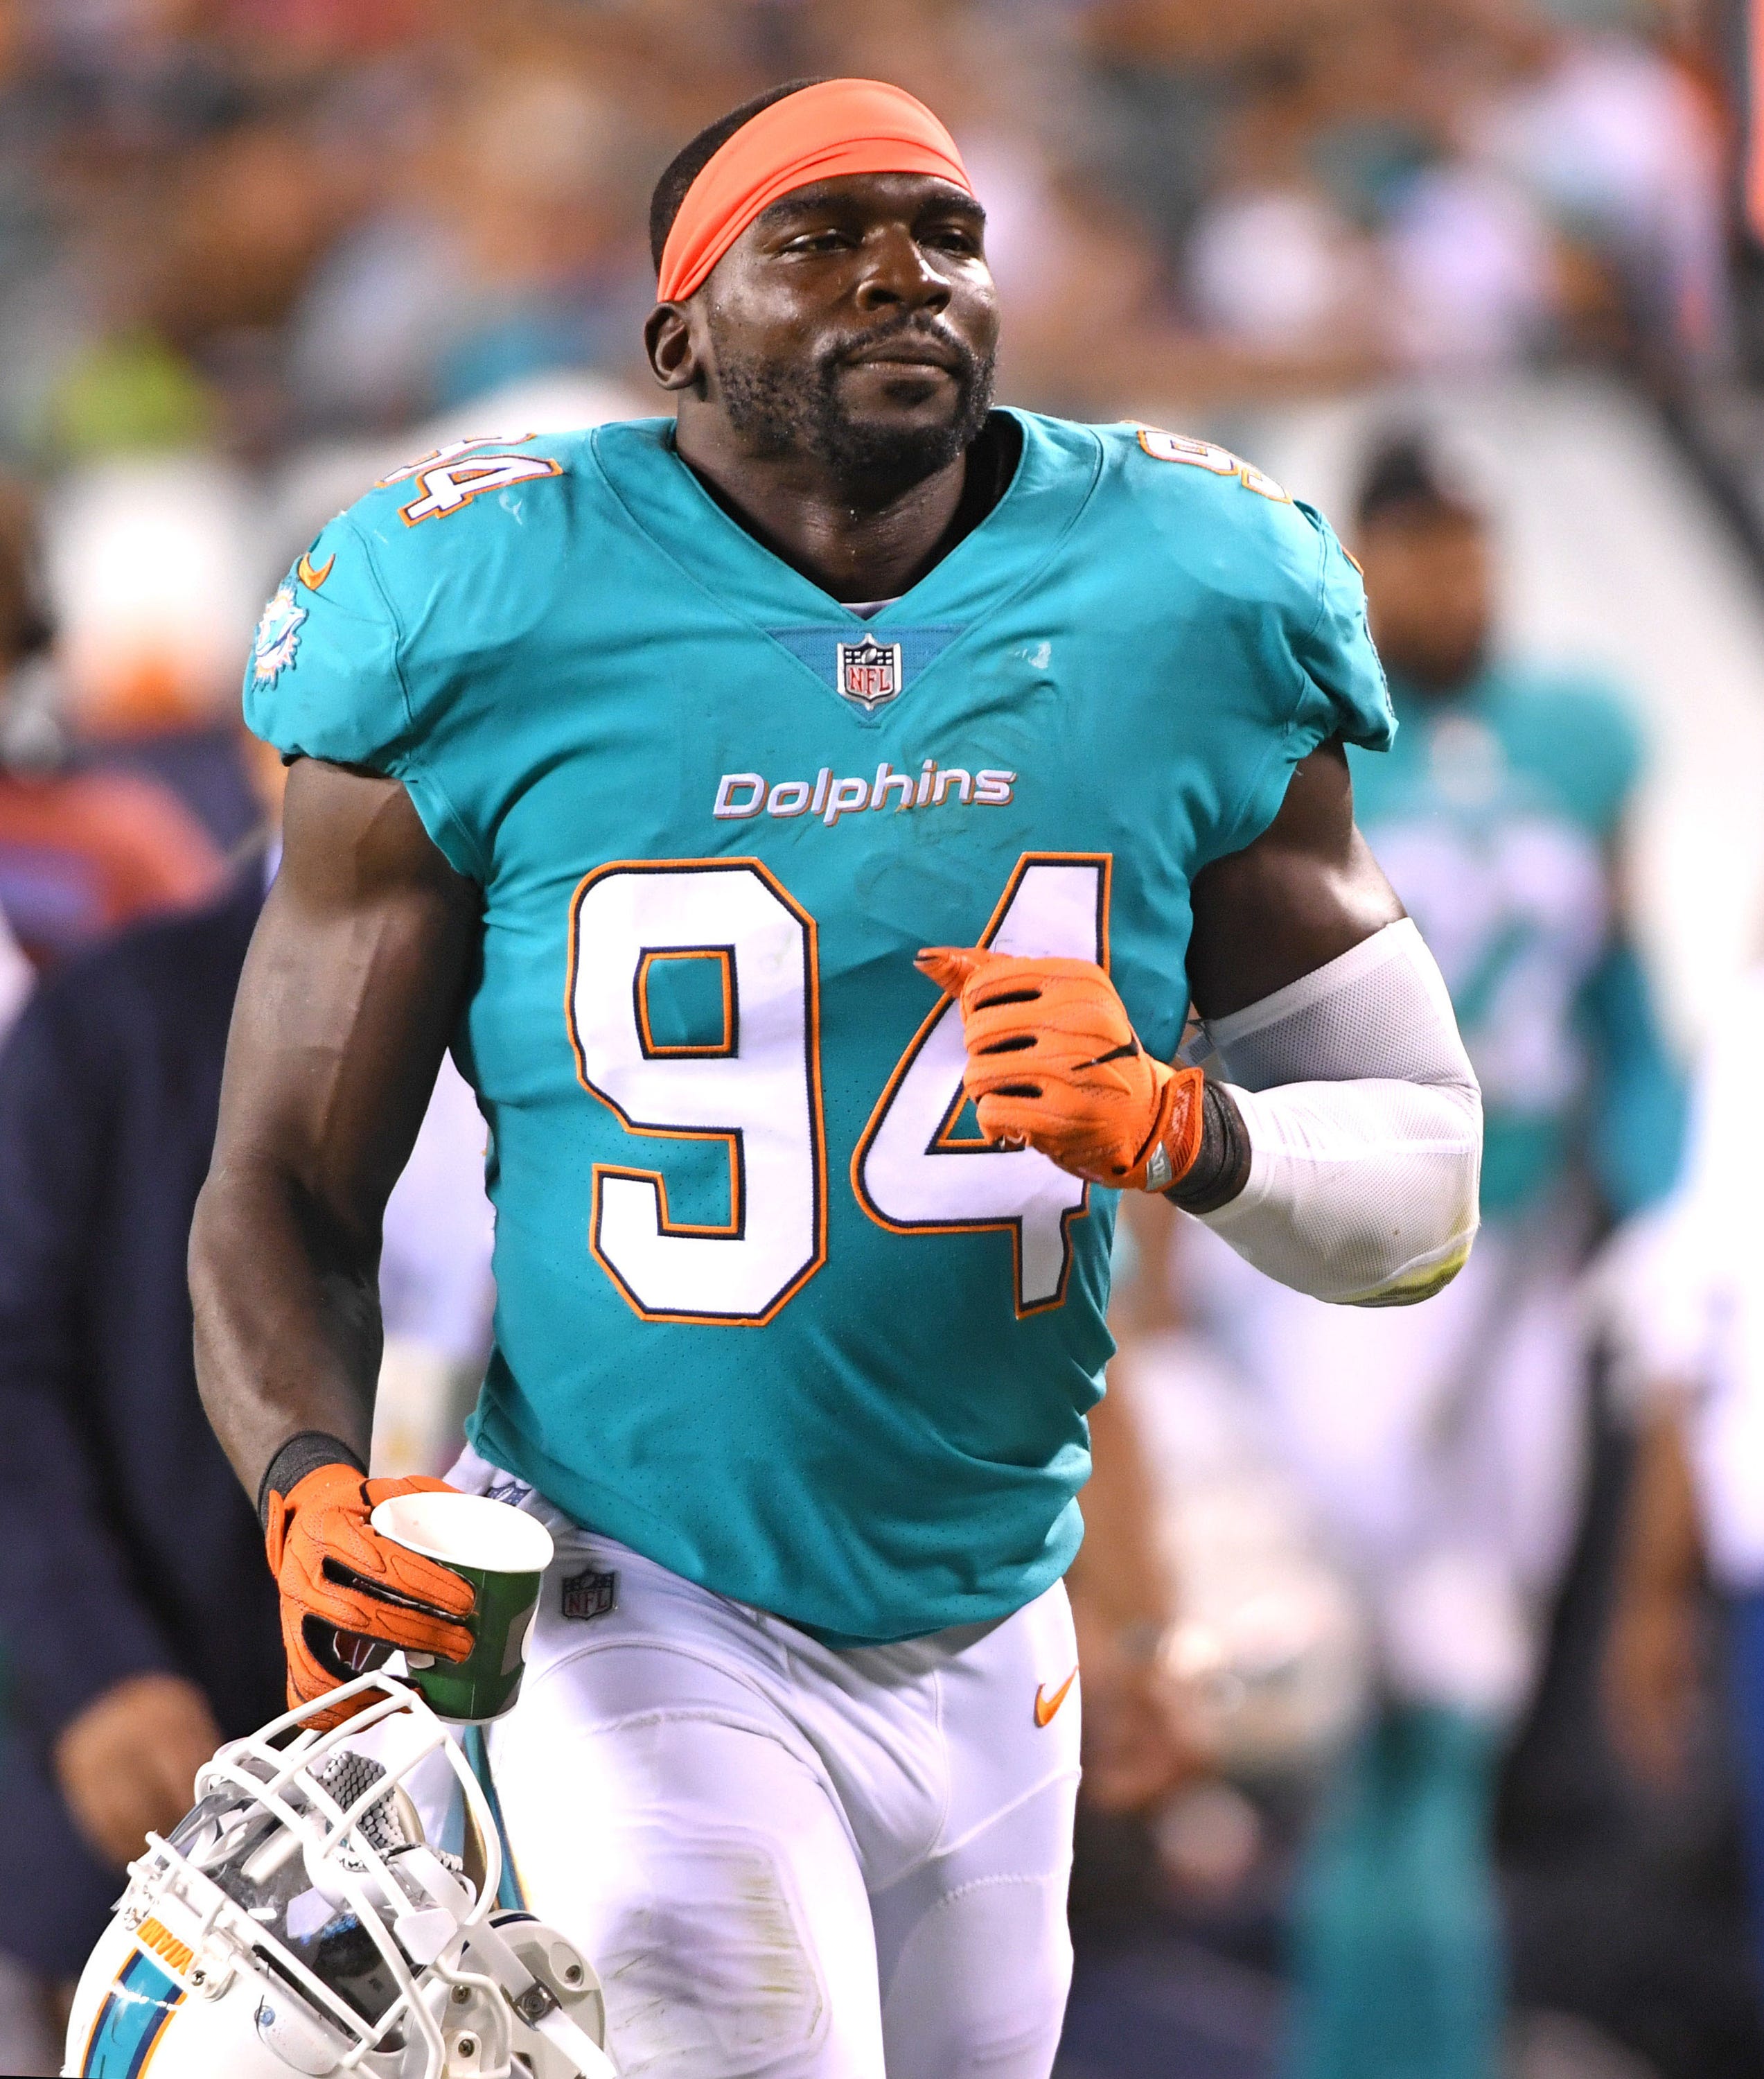 Lawrence Timmons reinstated by Dolphins after suspension